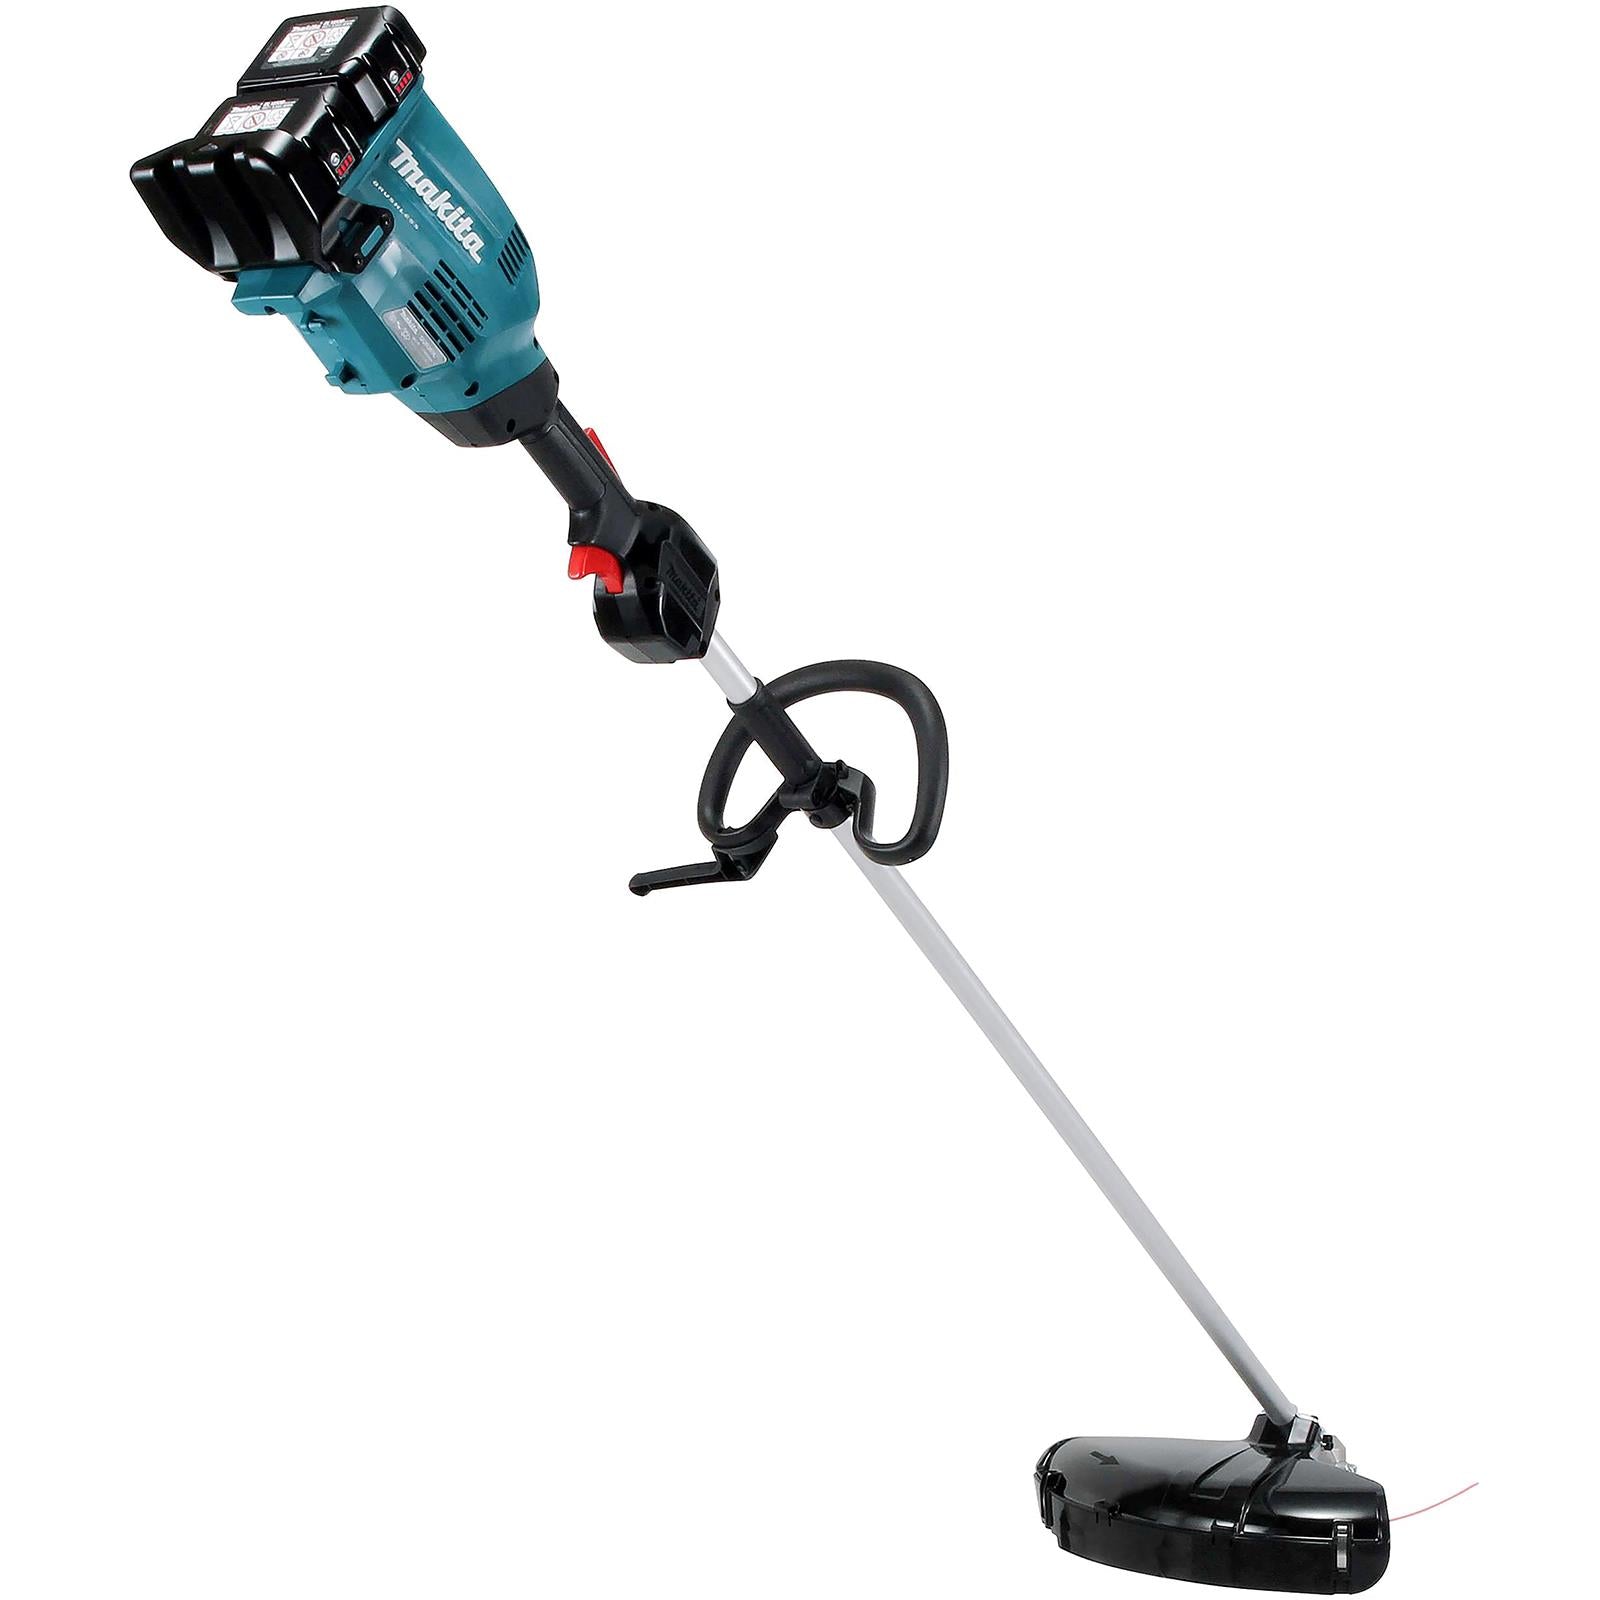 Makita Line Trimmer Strimmer Kit 2 x 18V LXT Brushless Cordless Garden Lawn Strimming 2 x 6Ah Battery and Dual Rapid Charger DUR369LPG2